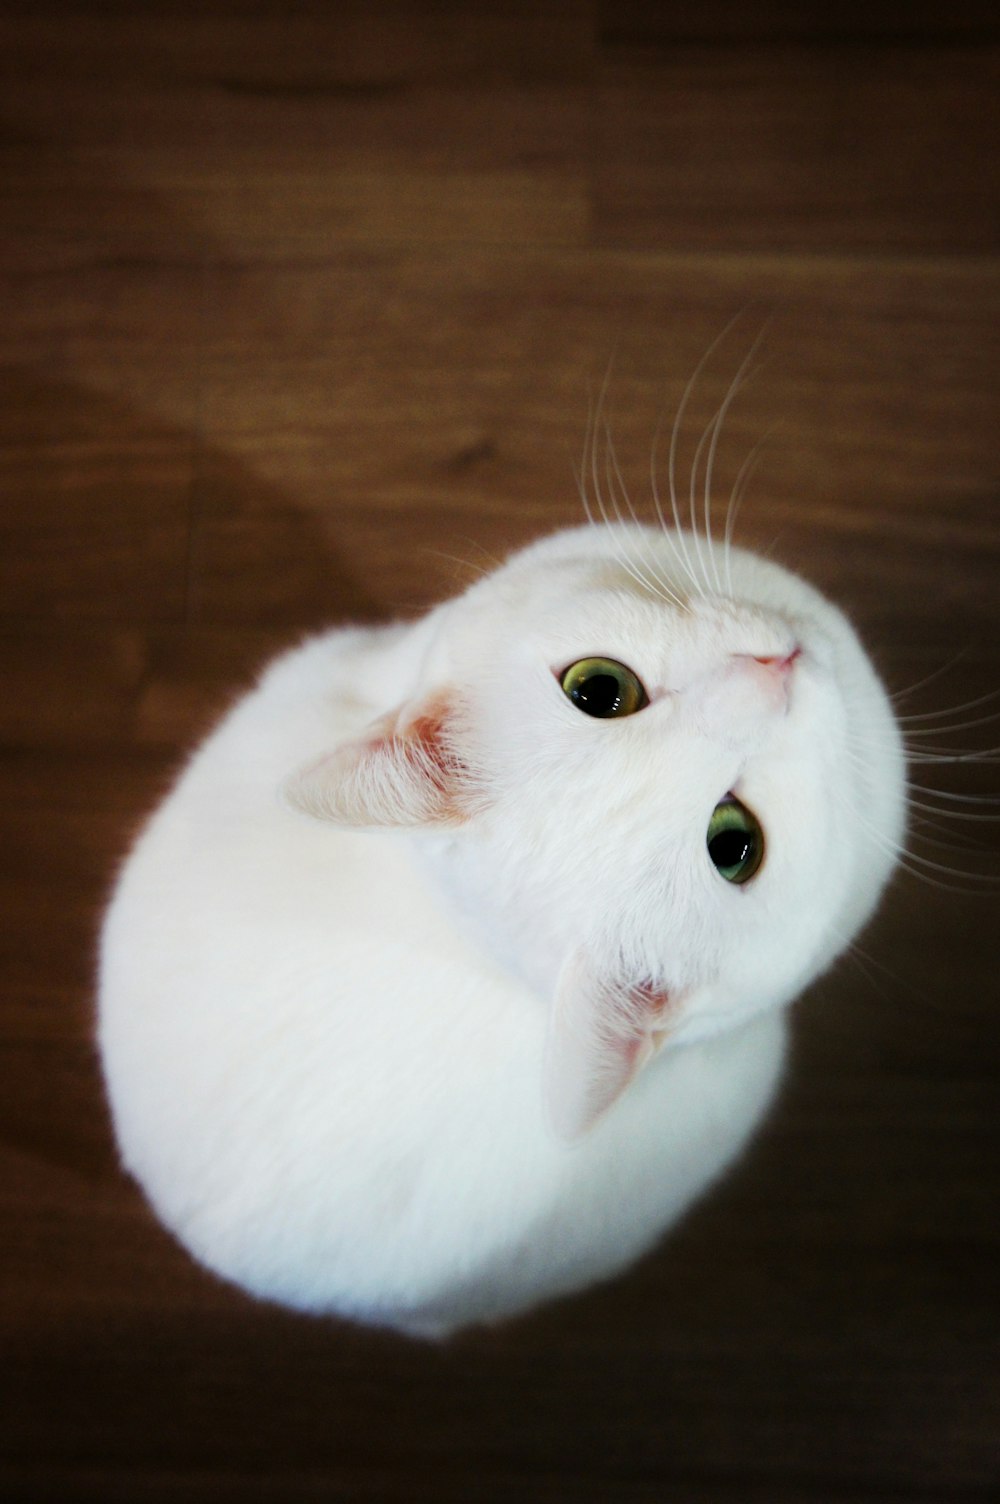 a white cat laying on top of a wooden floor